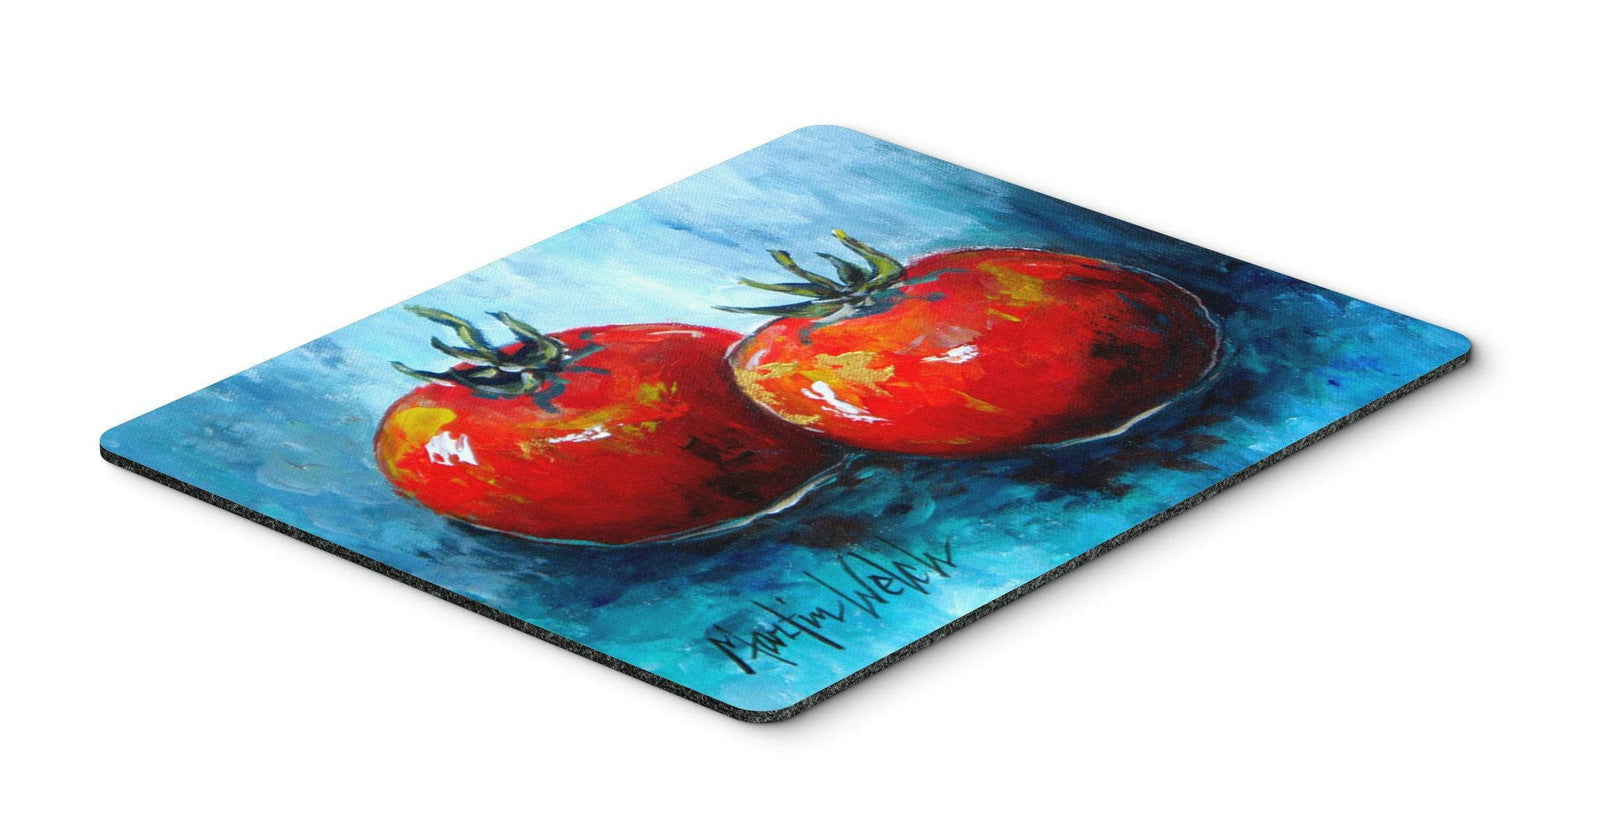 Vegetables - Tomatoes Red Toes Mouse Pad, Hot Pad or Trivet by Caroline's Treasures